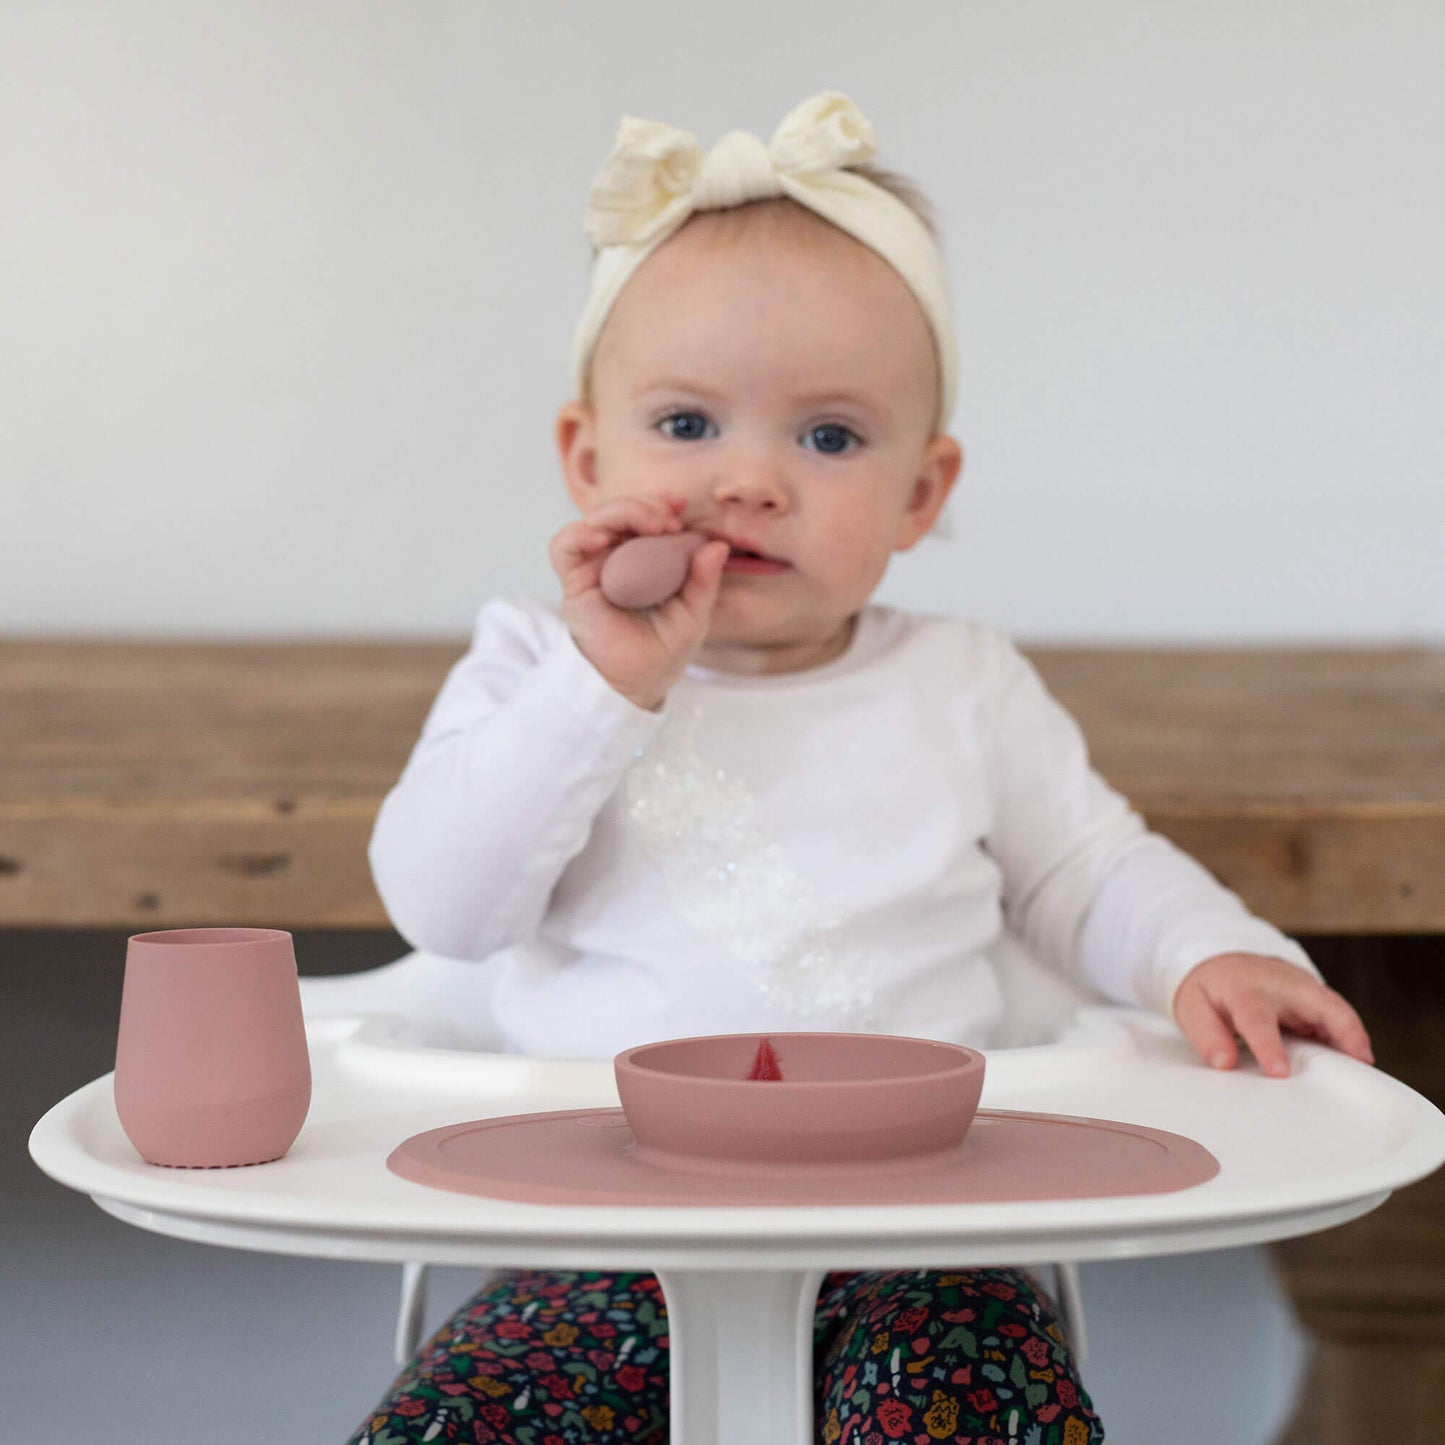 The Tiny Spoon in Blush by ezpz / Small, Sensory Silicone Spoon for Babies